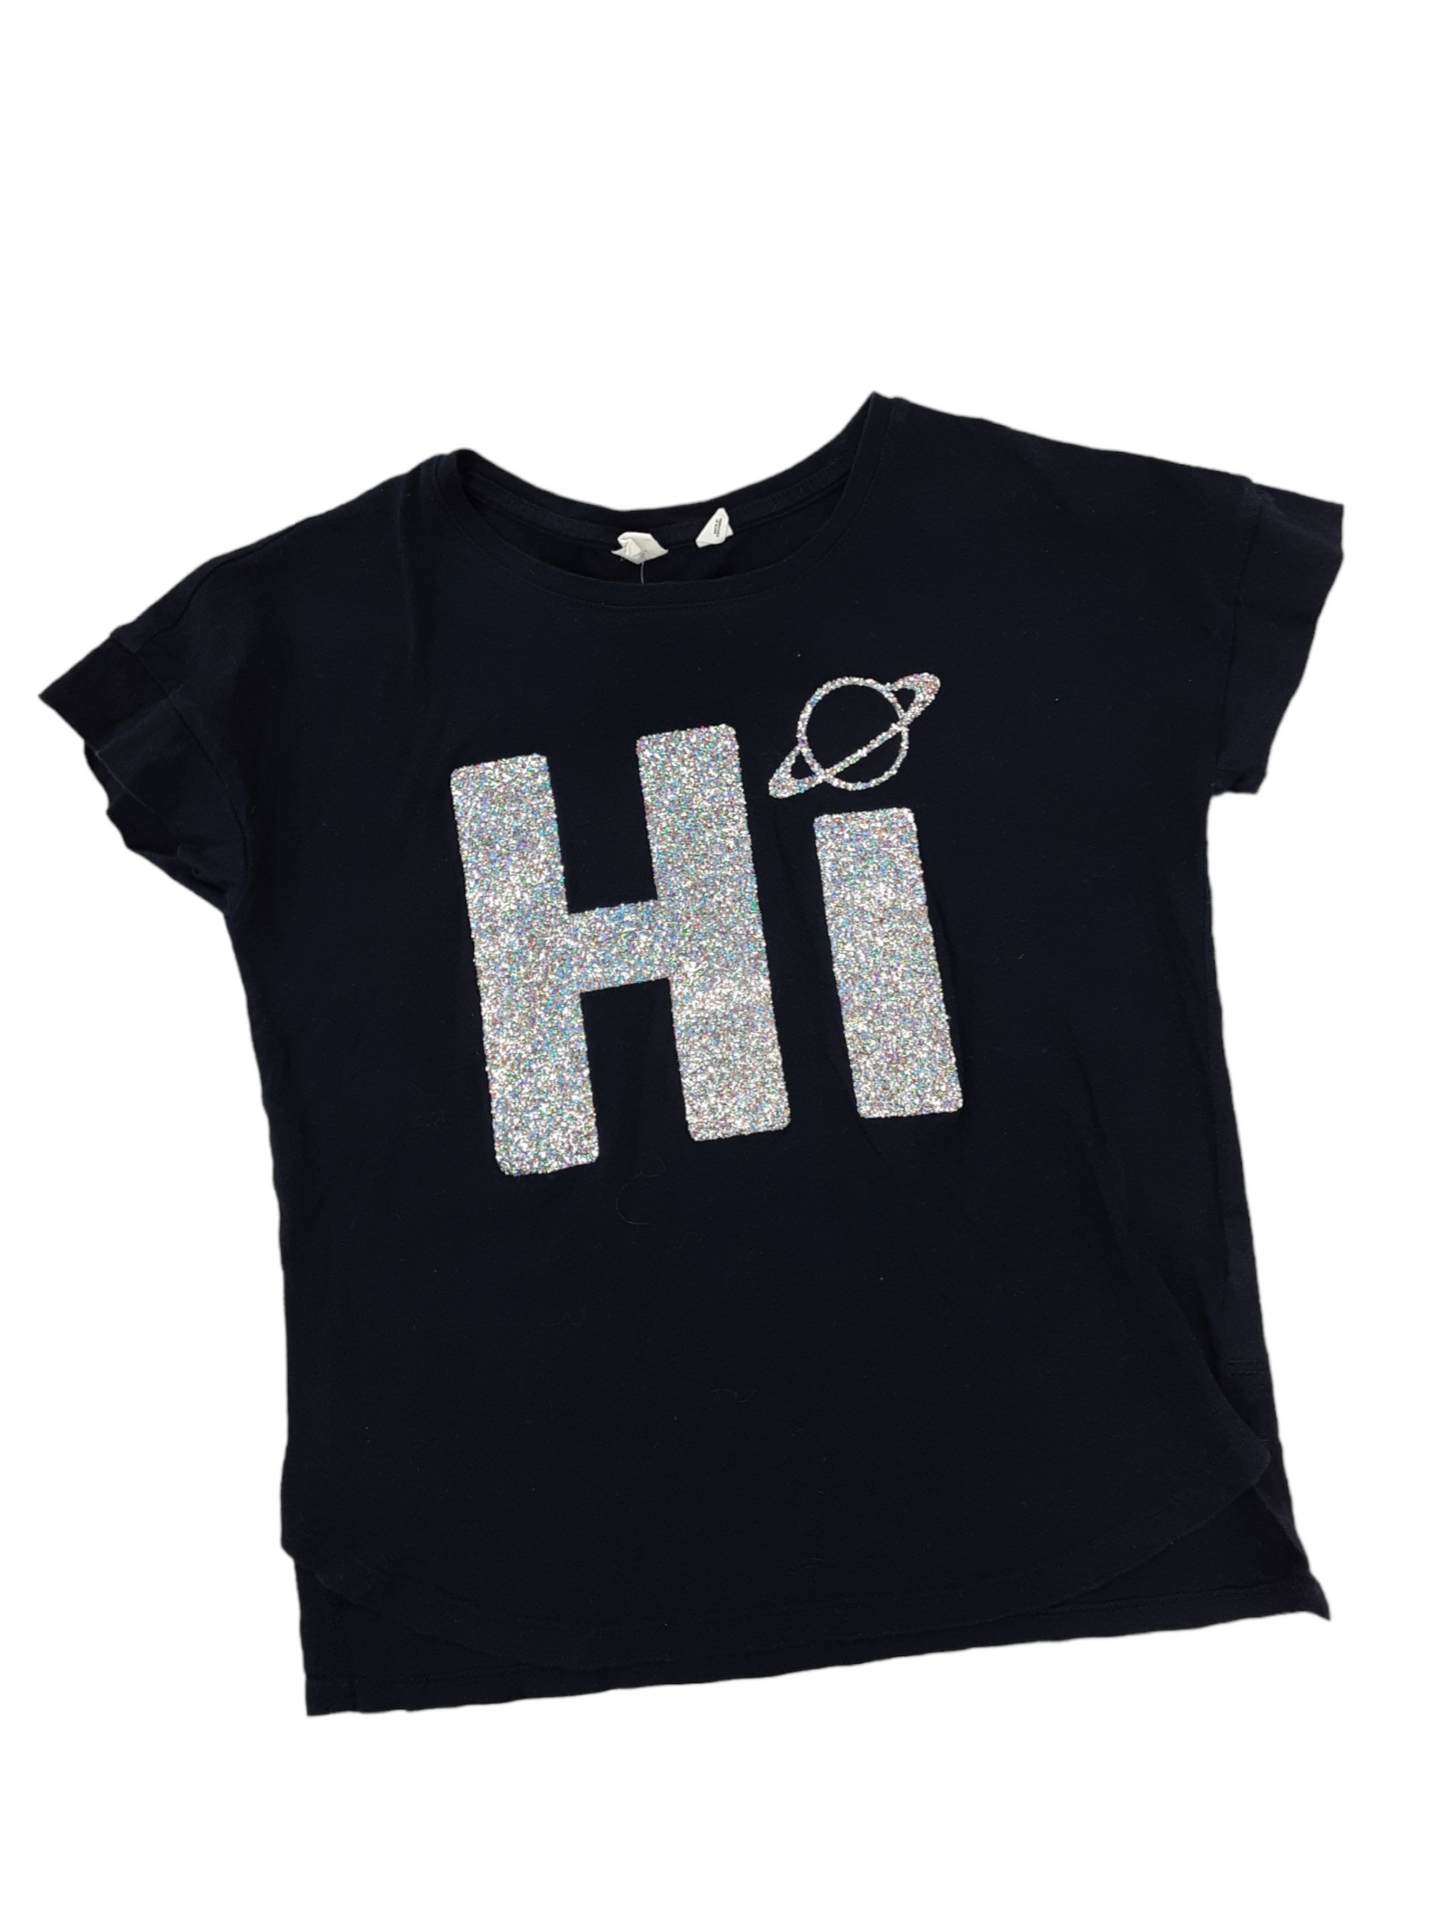 Glitter space tee size 8